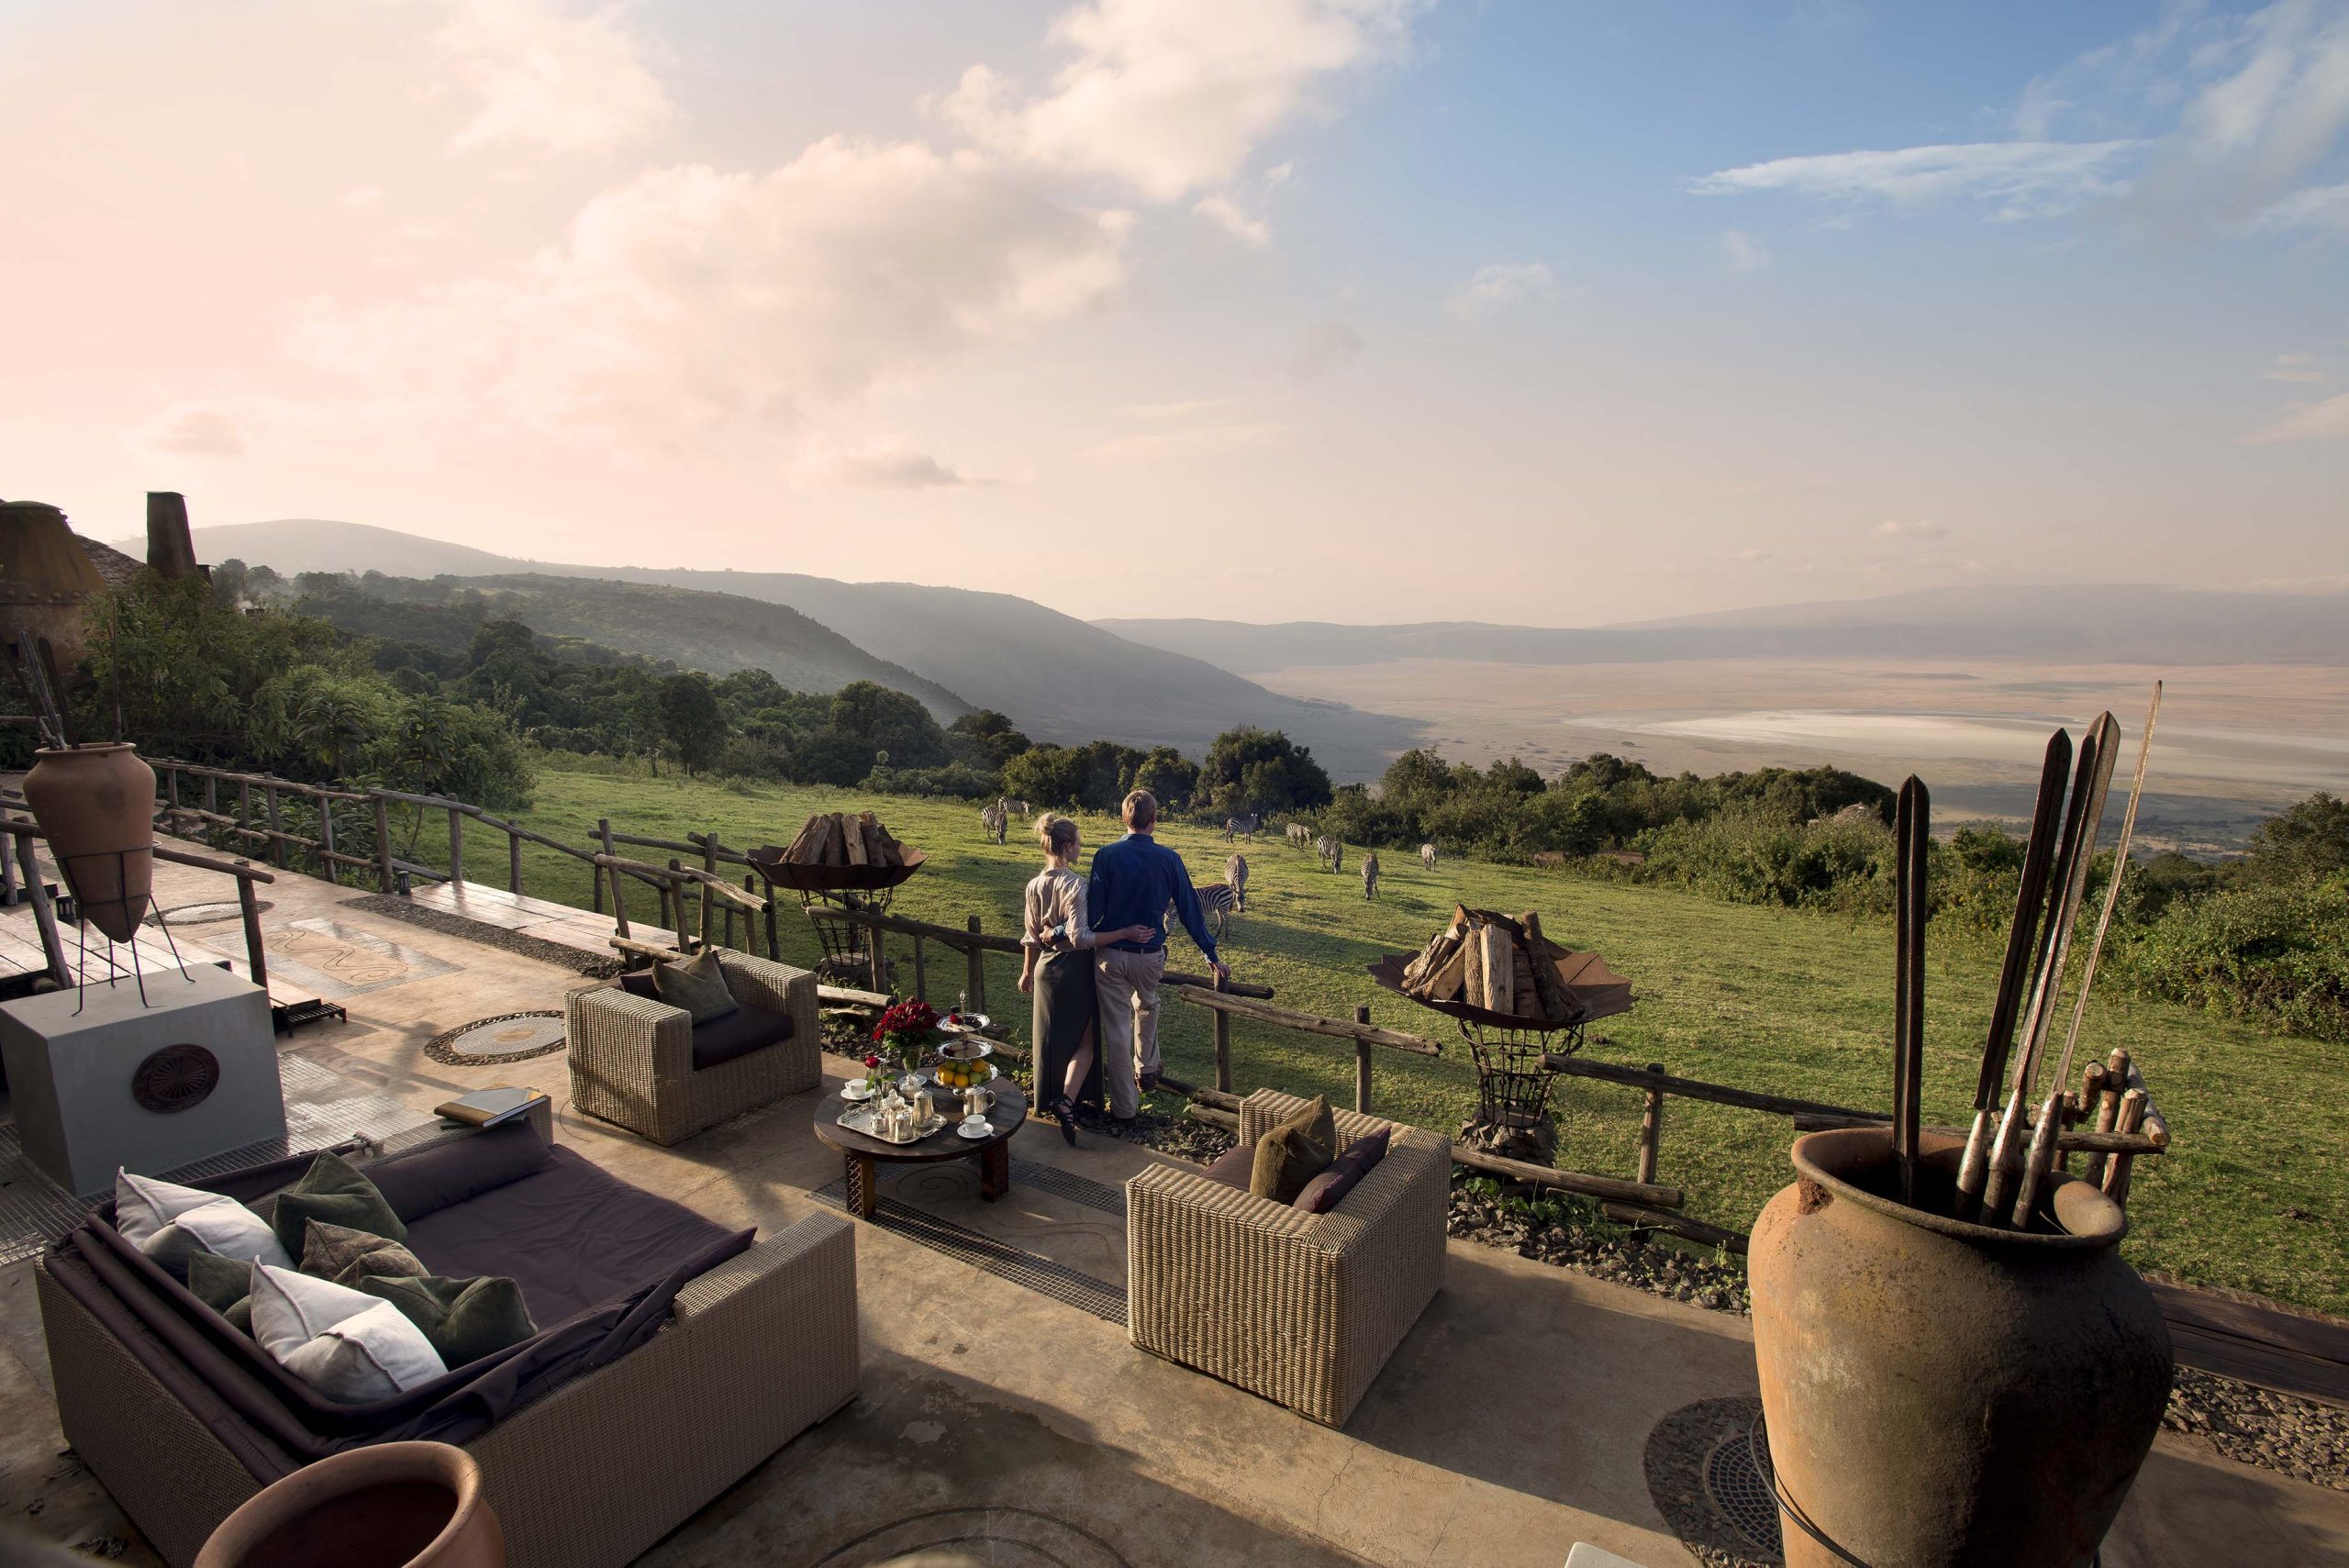 A couple looking at the view from the deck of a lodge on the rim of Ngorongoro Crater